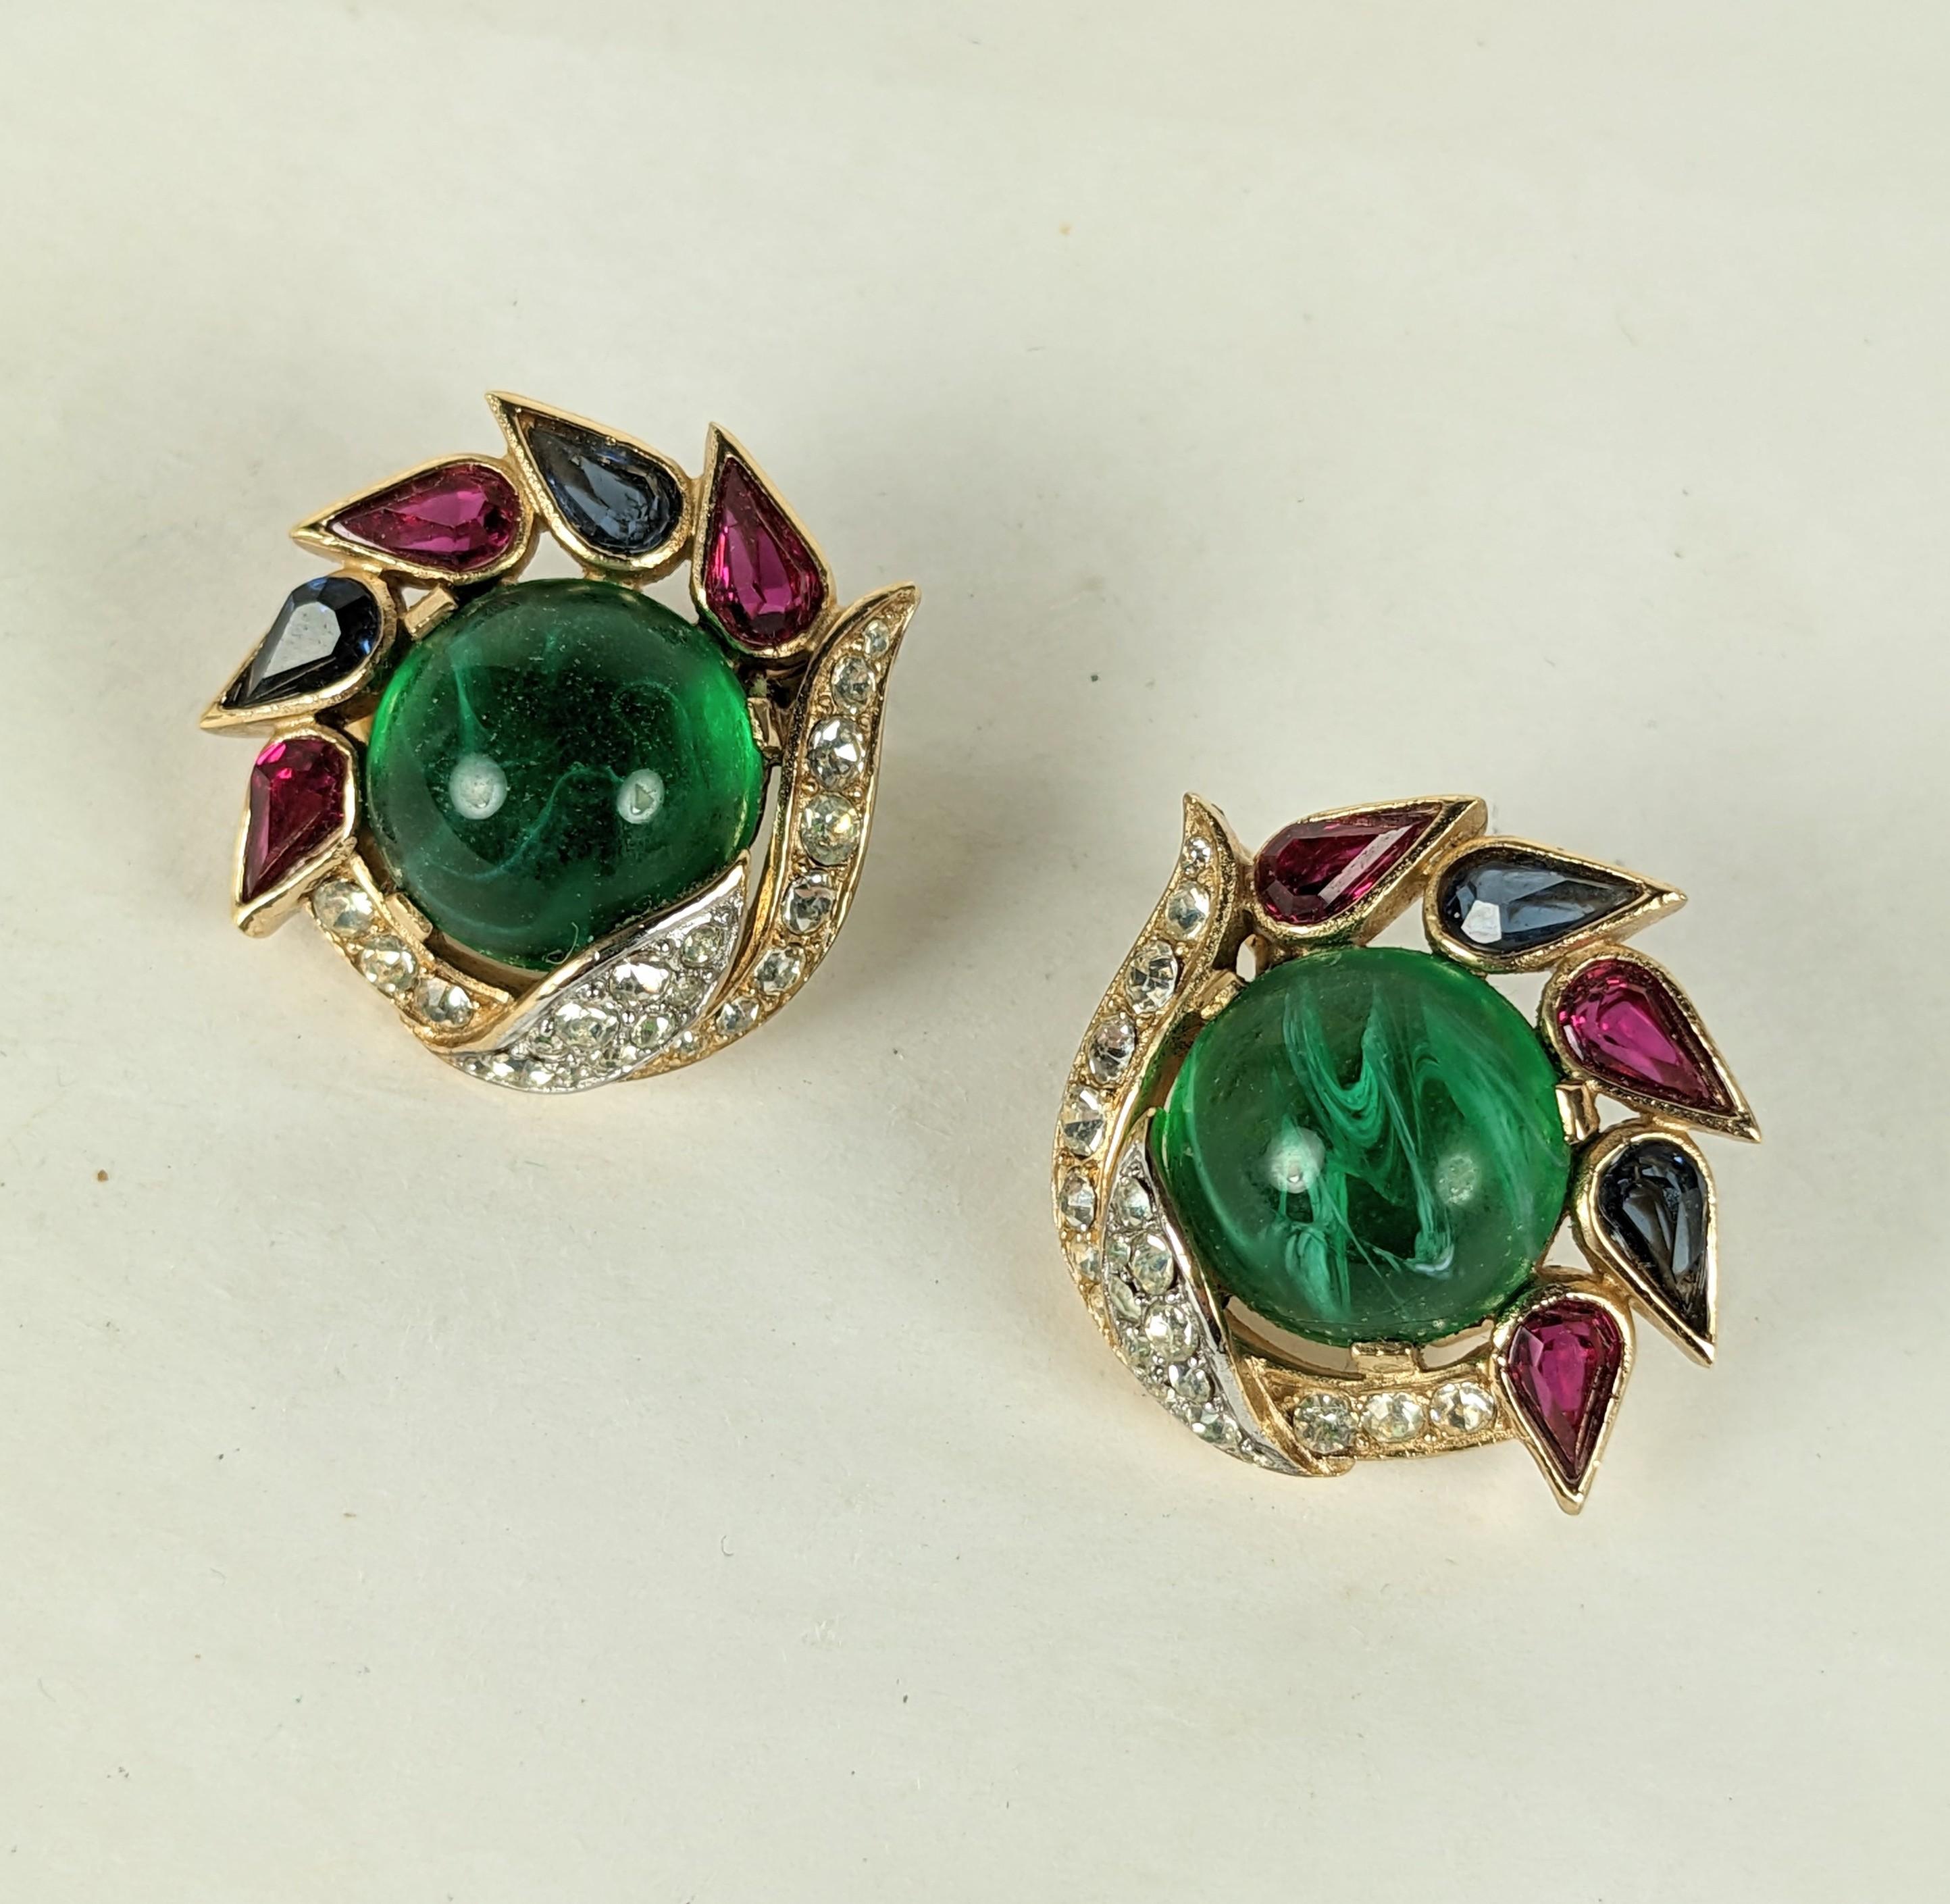 Trifari Jewels of India Moghul Earrings In Excellent Condition For Sale In New York, NY